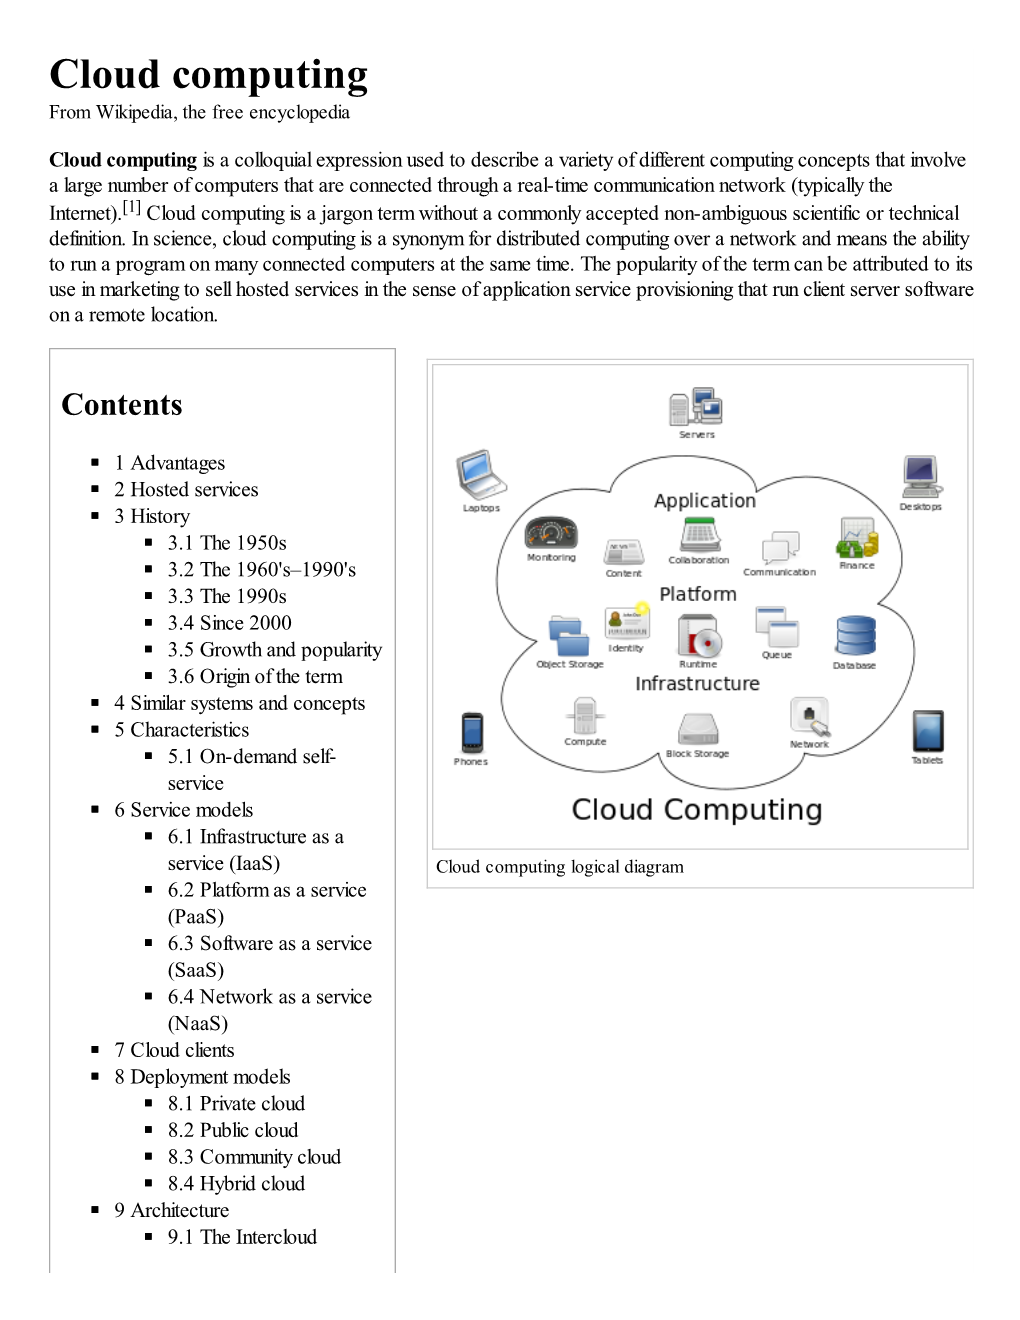 Cloud Computing from Wikipedia, the Free Encyclopedia